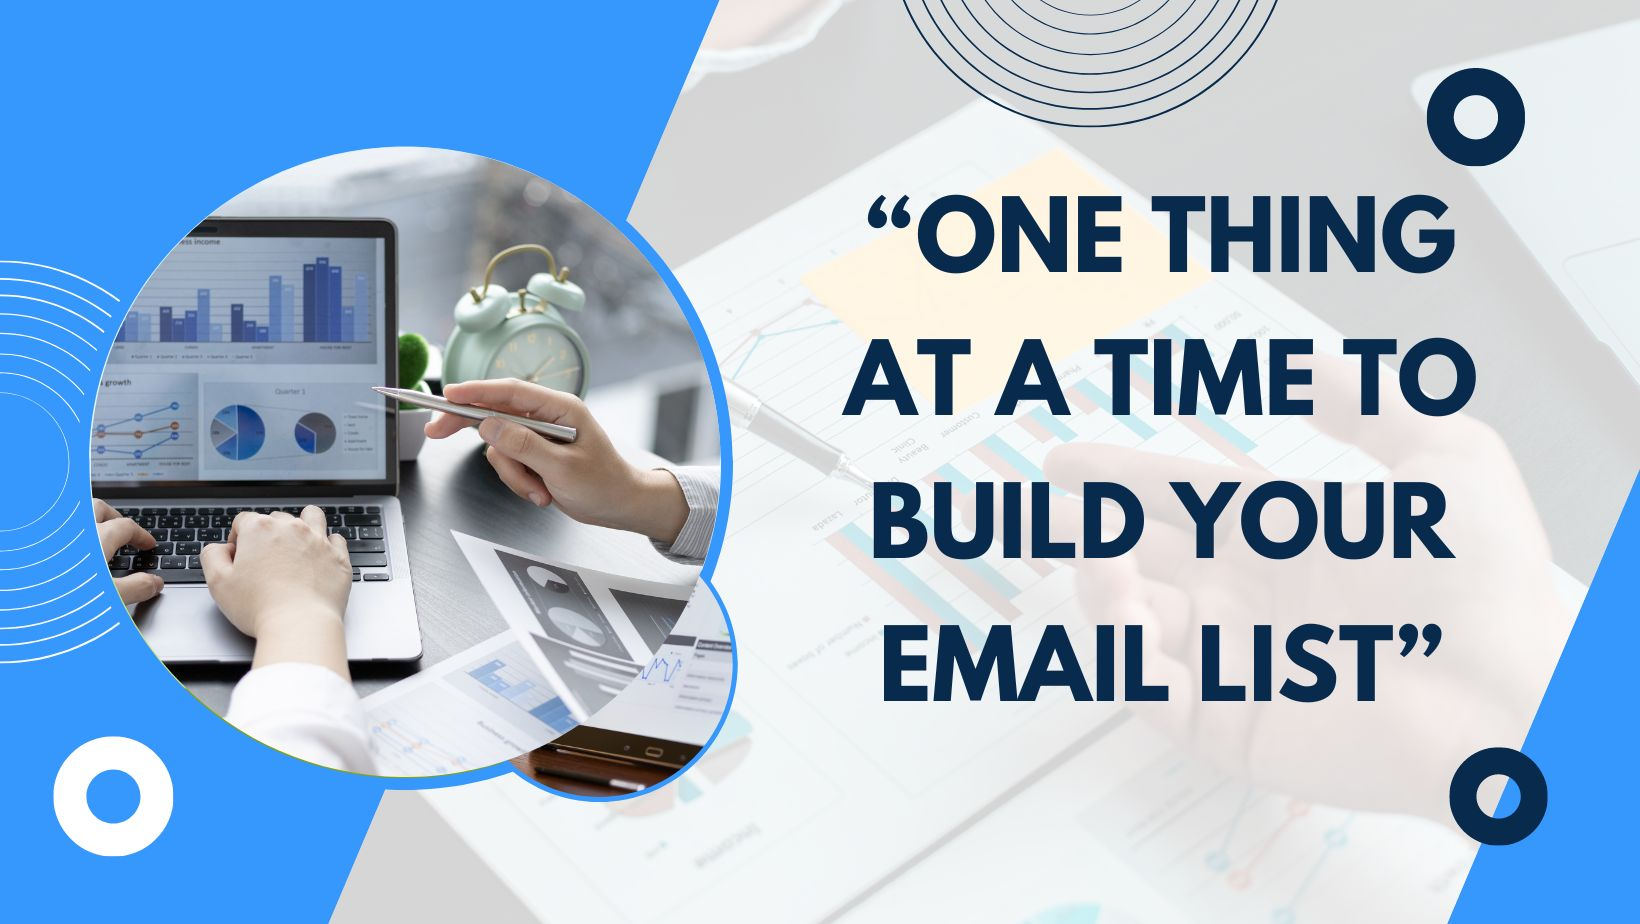 One thing at a time to build your email list